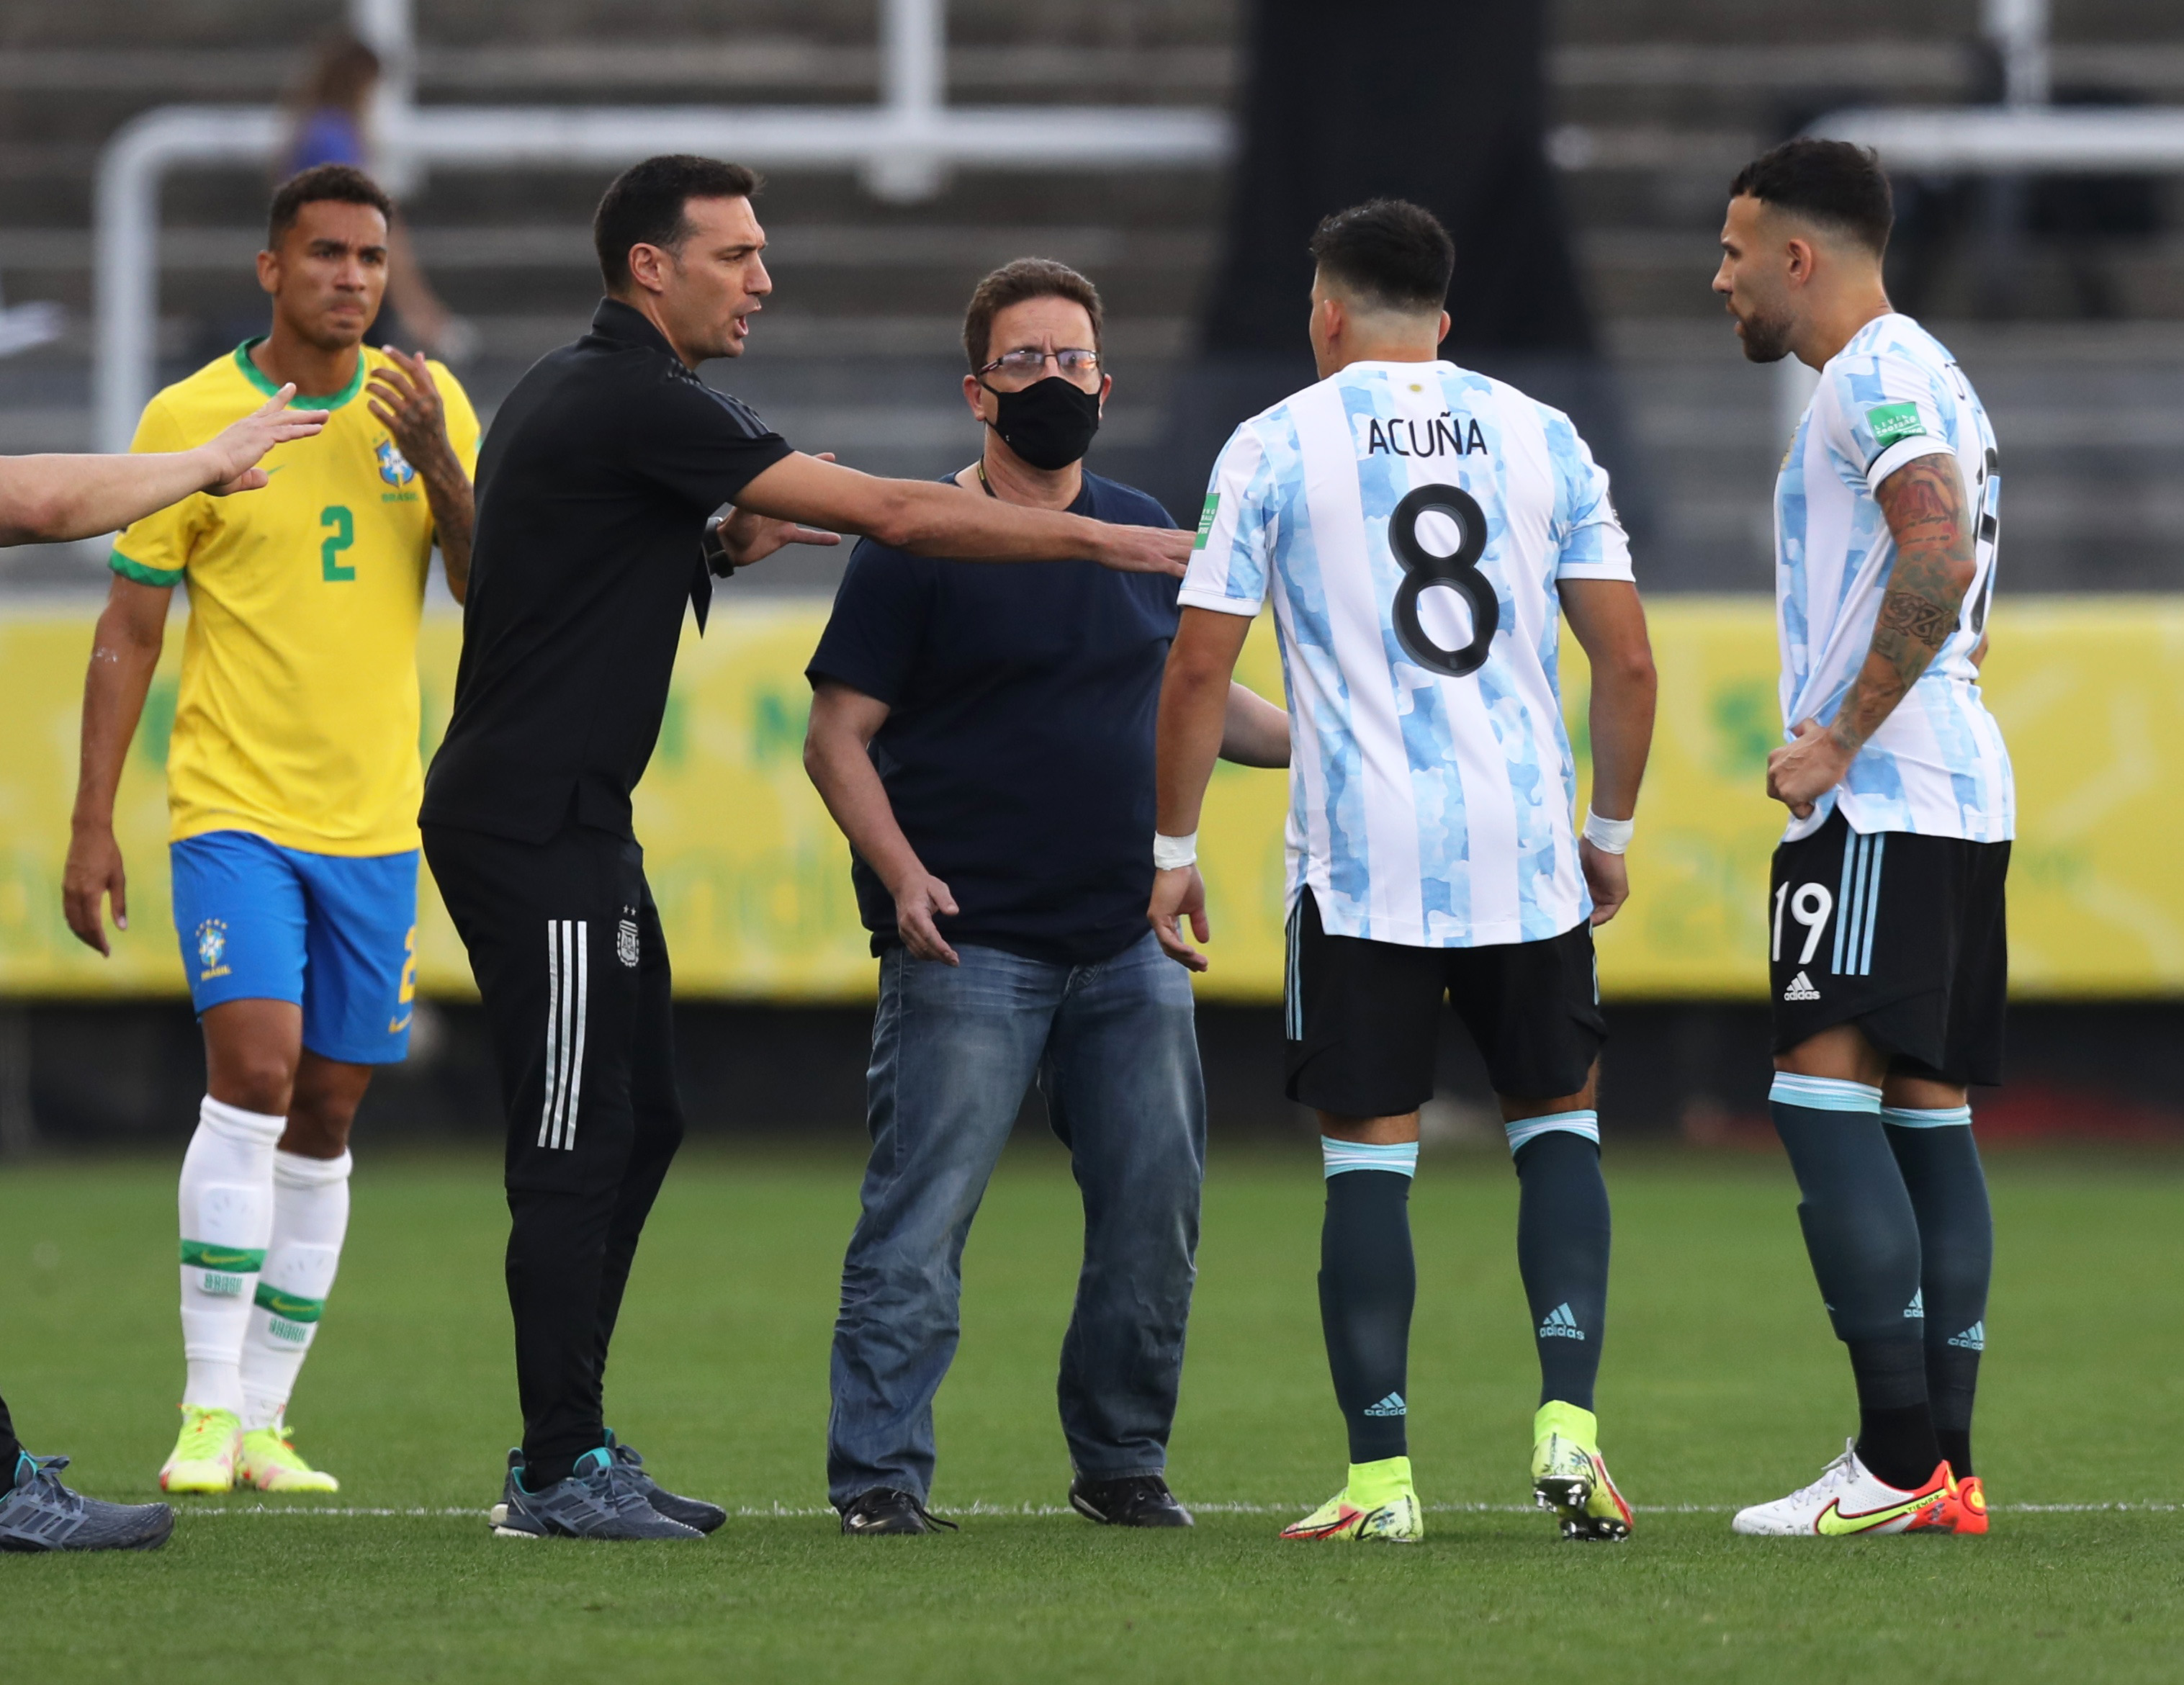 Soccer Football - World Cup - South American Qualifiers - Brazil v Argentina - Arena Corinthians, Sao Paulo, Brazil - September 5, 2021 Argentina coach Lionel Scaloni, Marcos Acuna, and Nicolas Otamendi during an interruption in play REUTERS/Amanda Perobelli